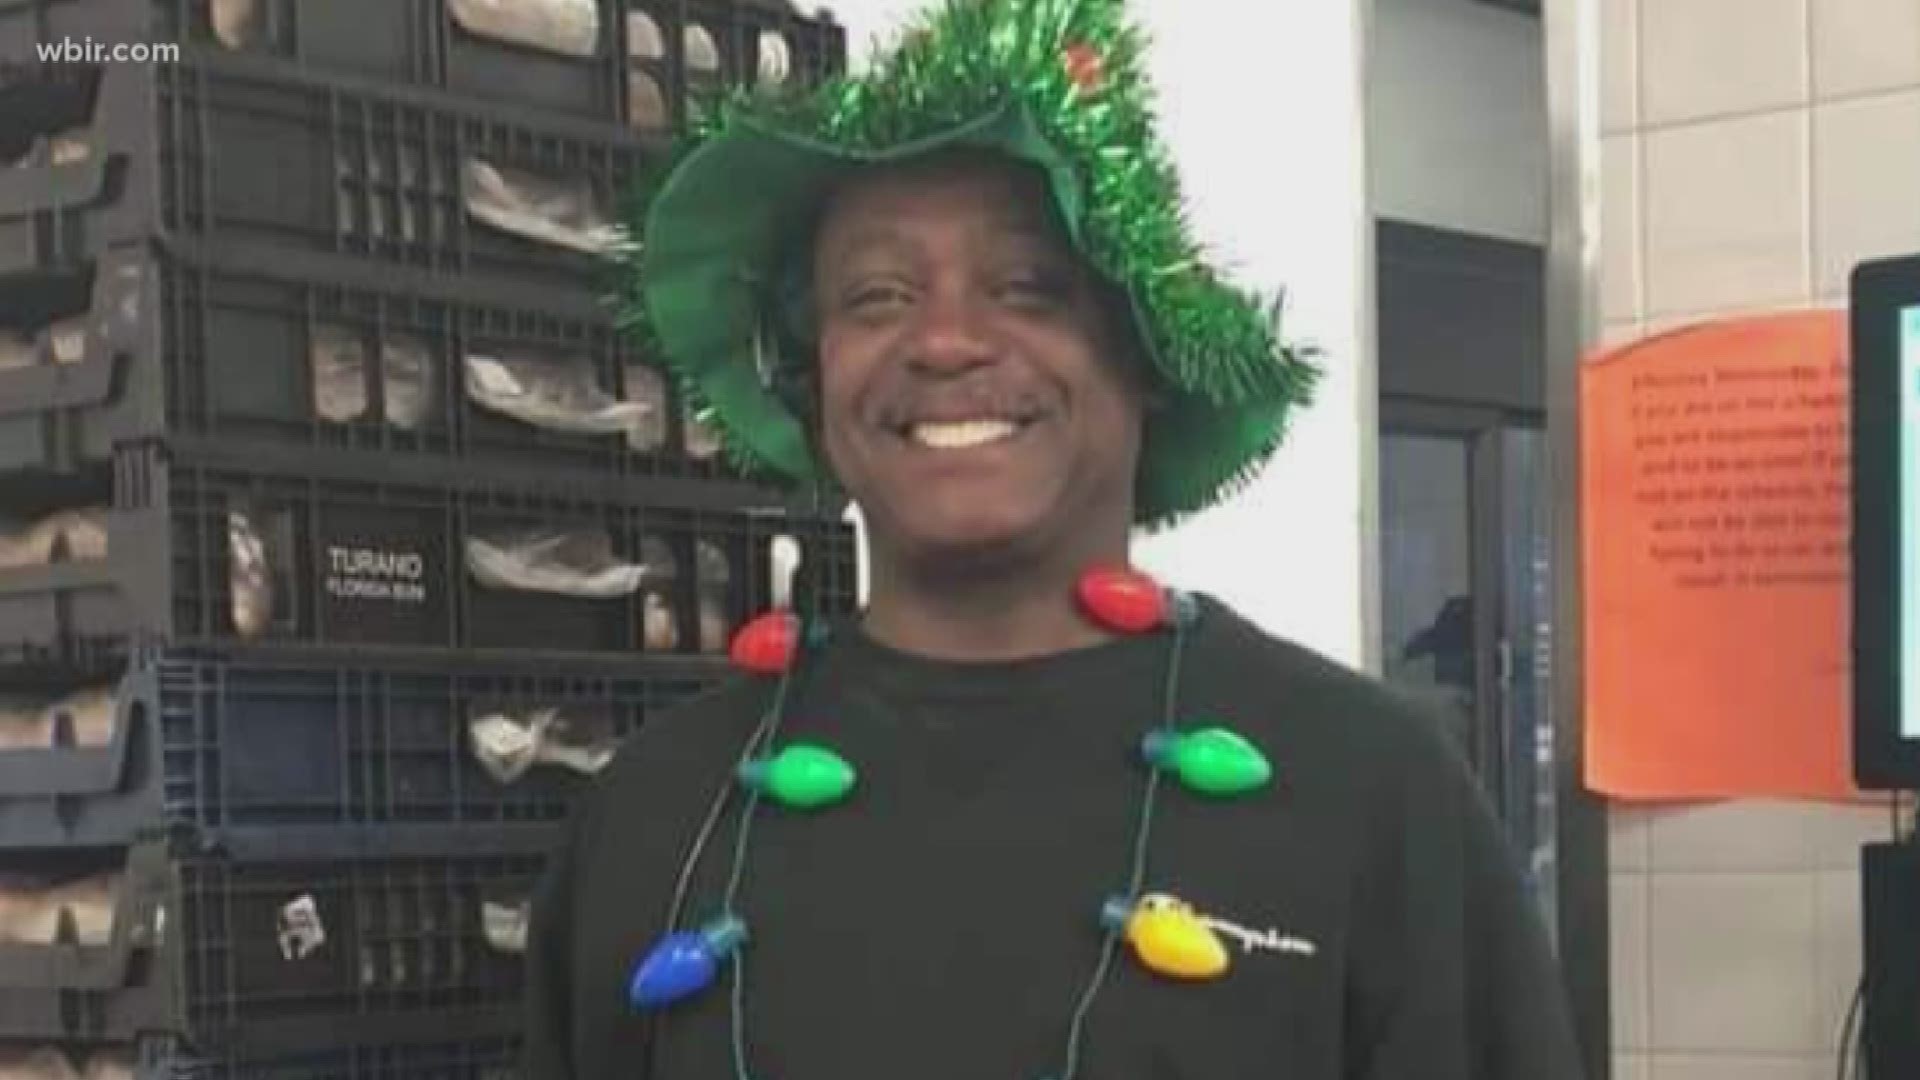 A community is mourning a man who made hundreds of mornings just a little bit better. Kelvin Burris passed away recently, and people knew him for using his job at the Fountain City McDonald's to make people smile every day for nearly a decade.